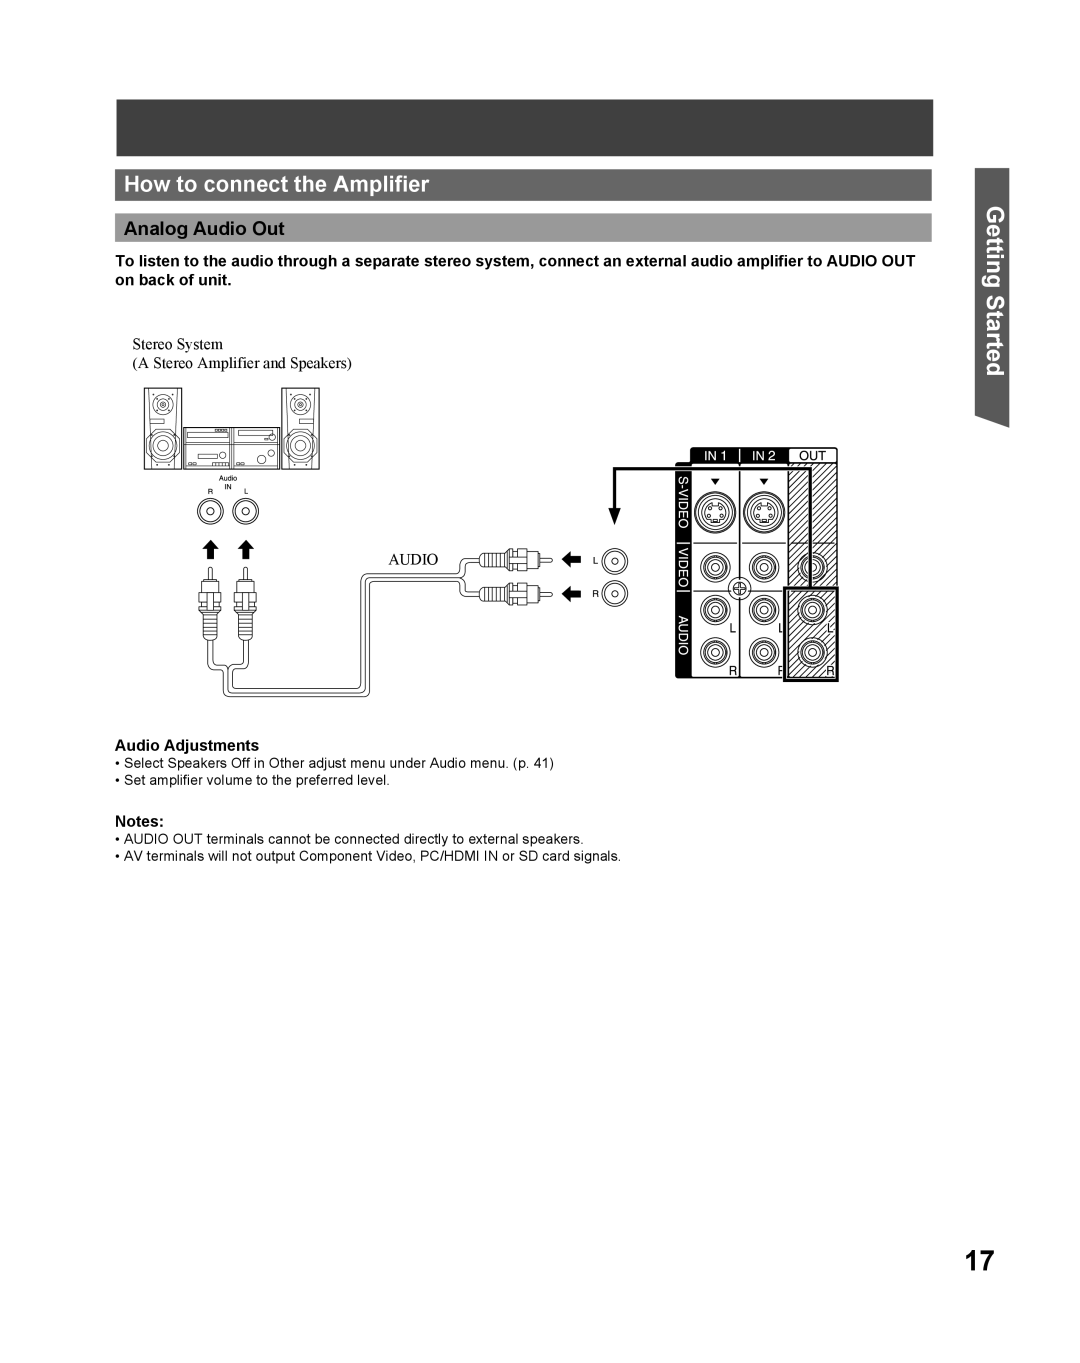 Panasonic PT 61LCX66, PT-61LCX16 manual How to connect the Amplifier, Analog Audio Out, Getting Started, Audio Adjustments 